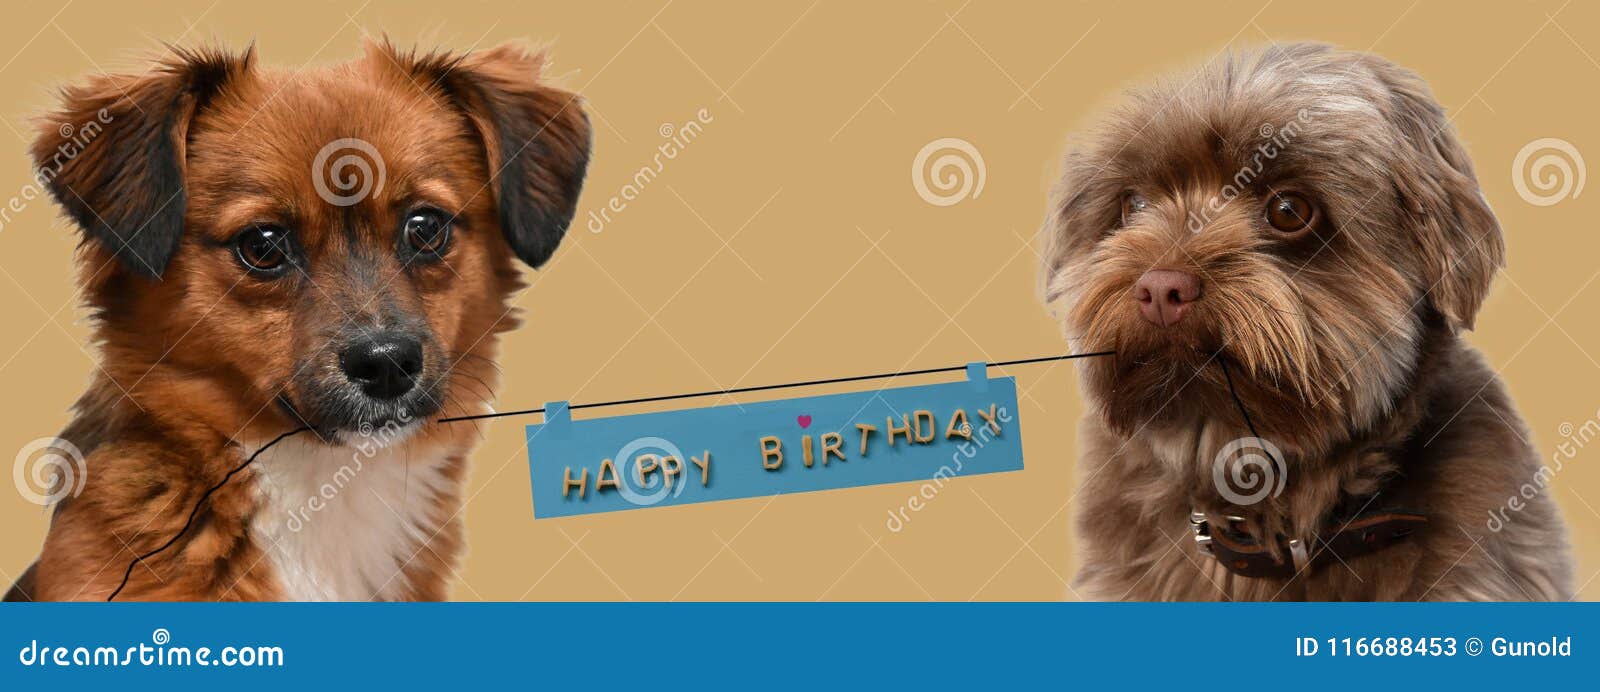 Little Puppy Dogs With Birthday Greetings Stock Image Image Of Bolonka Crossbreed 116688453